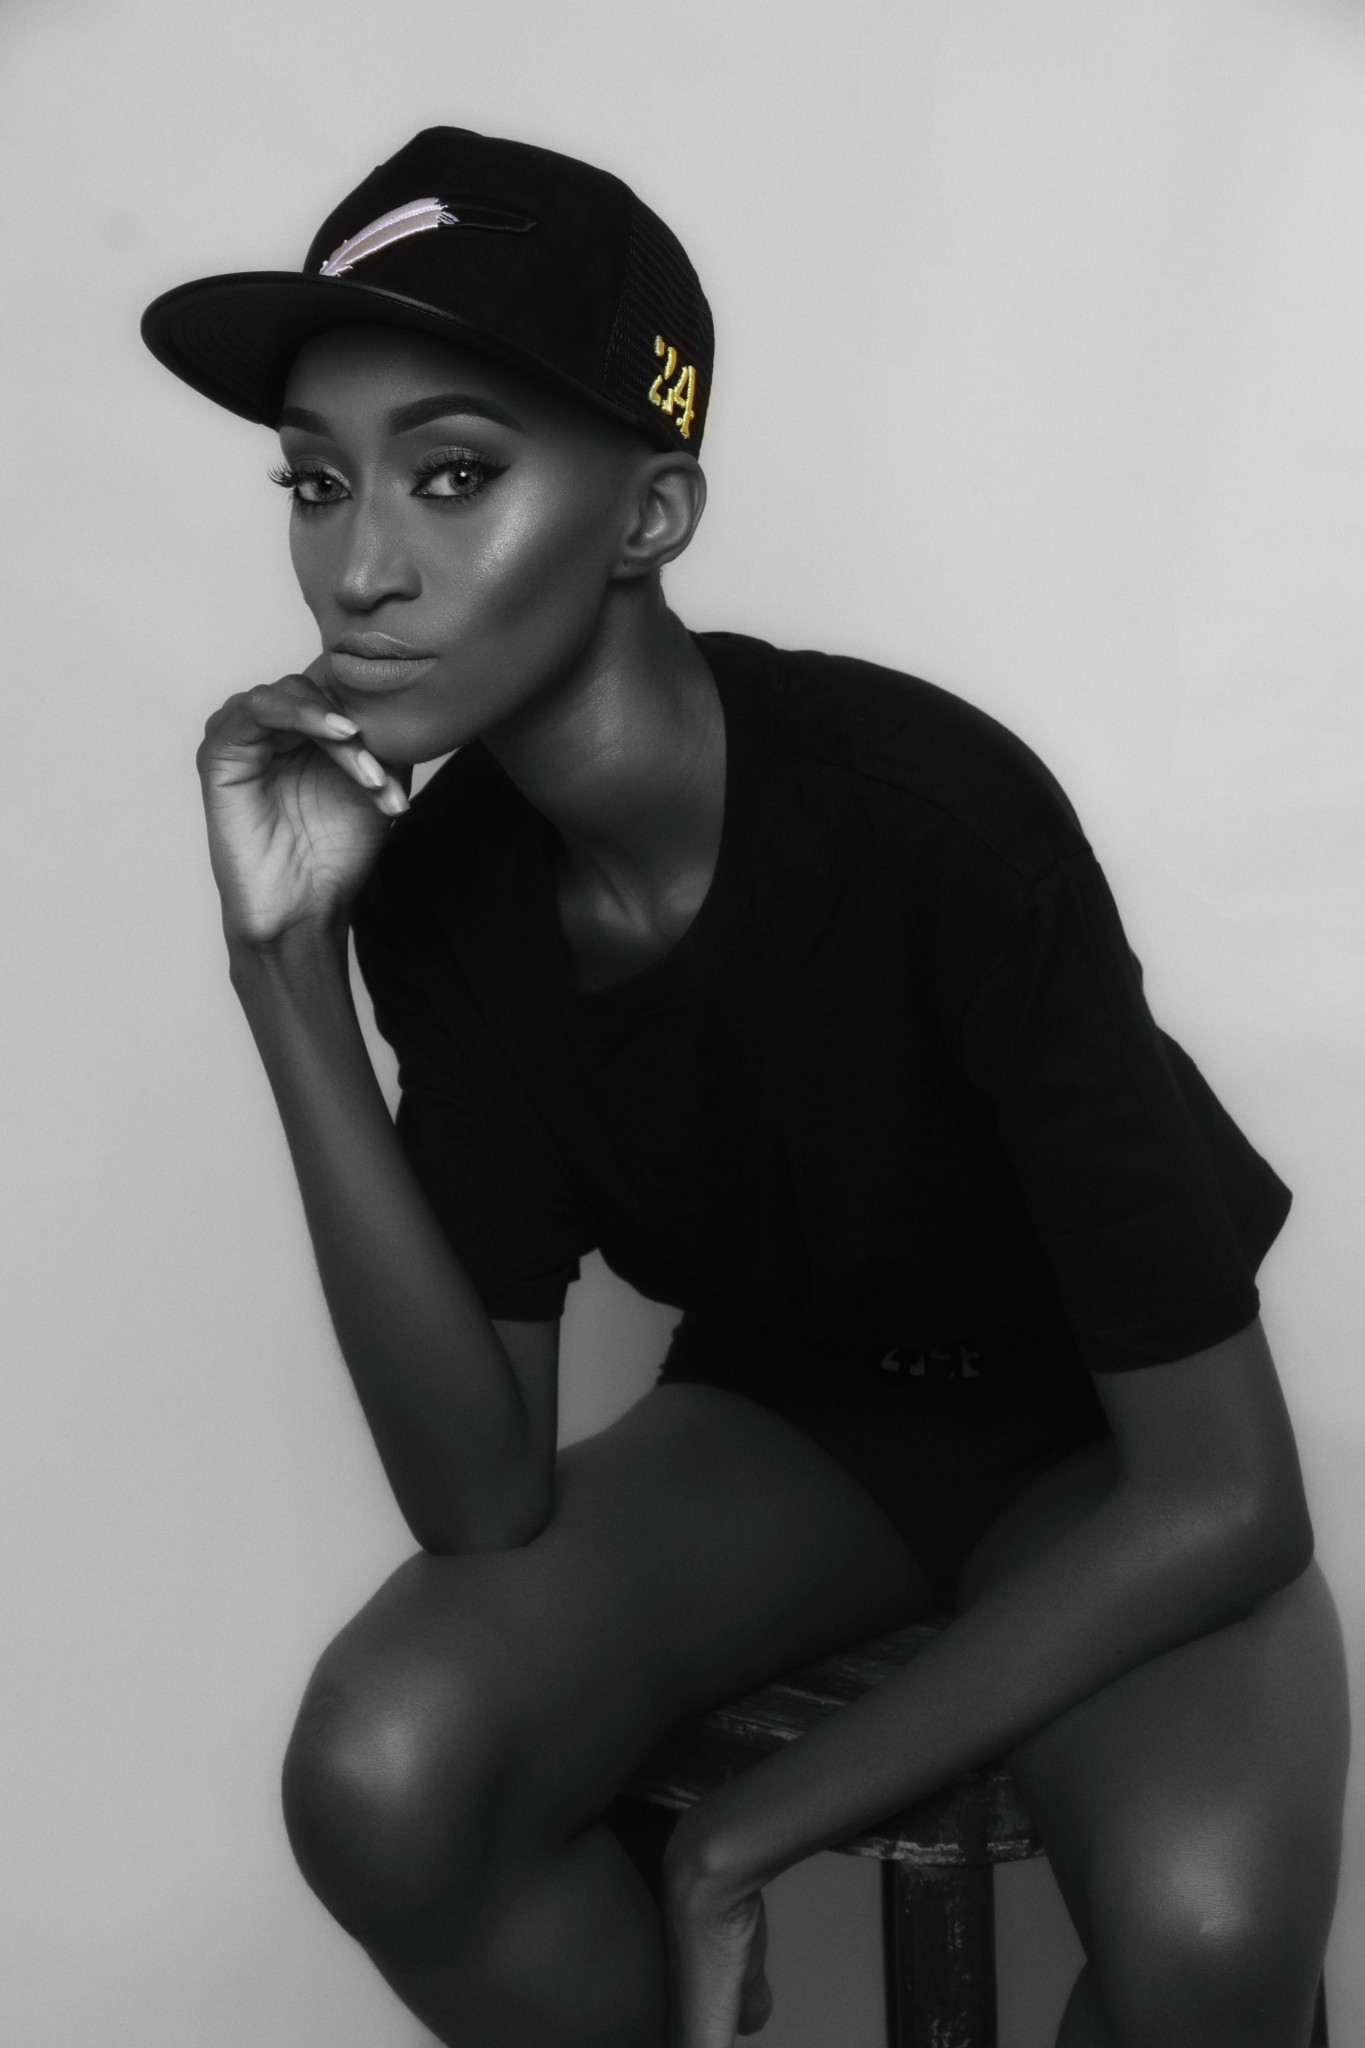 Fashion Label 24 relaunches its Snapback Collection 'My Culture, My Heritage, Me'